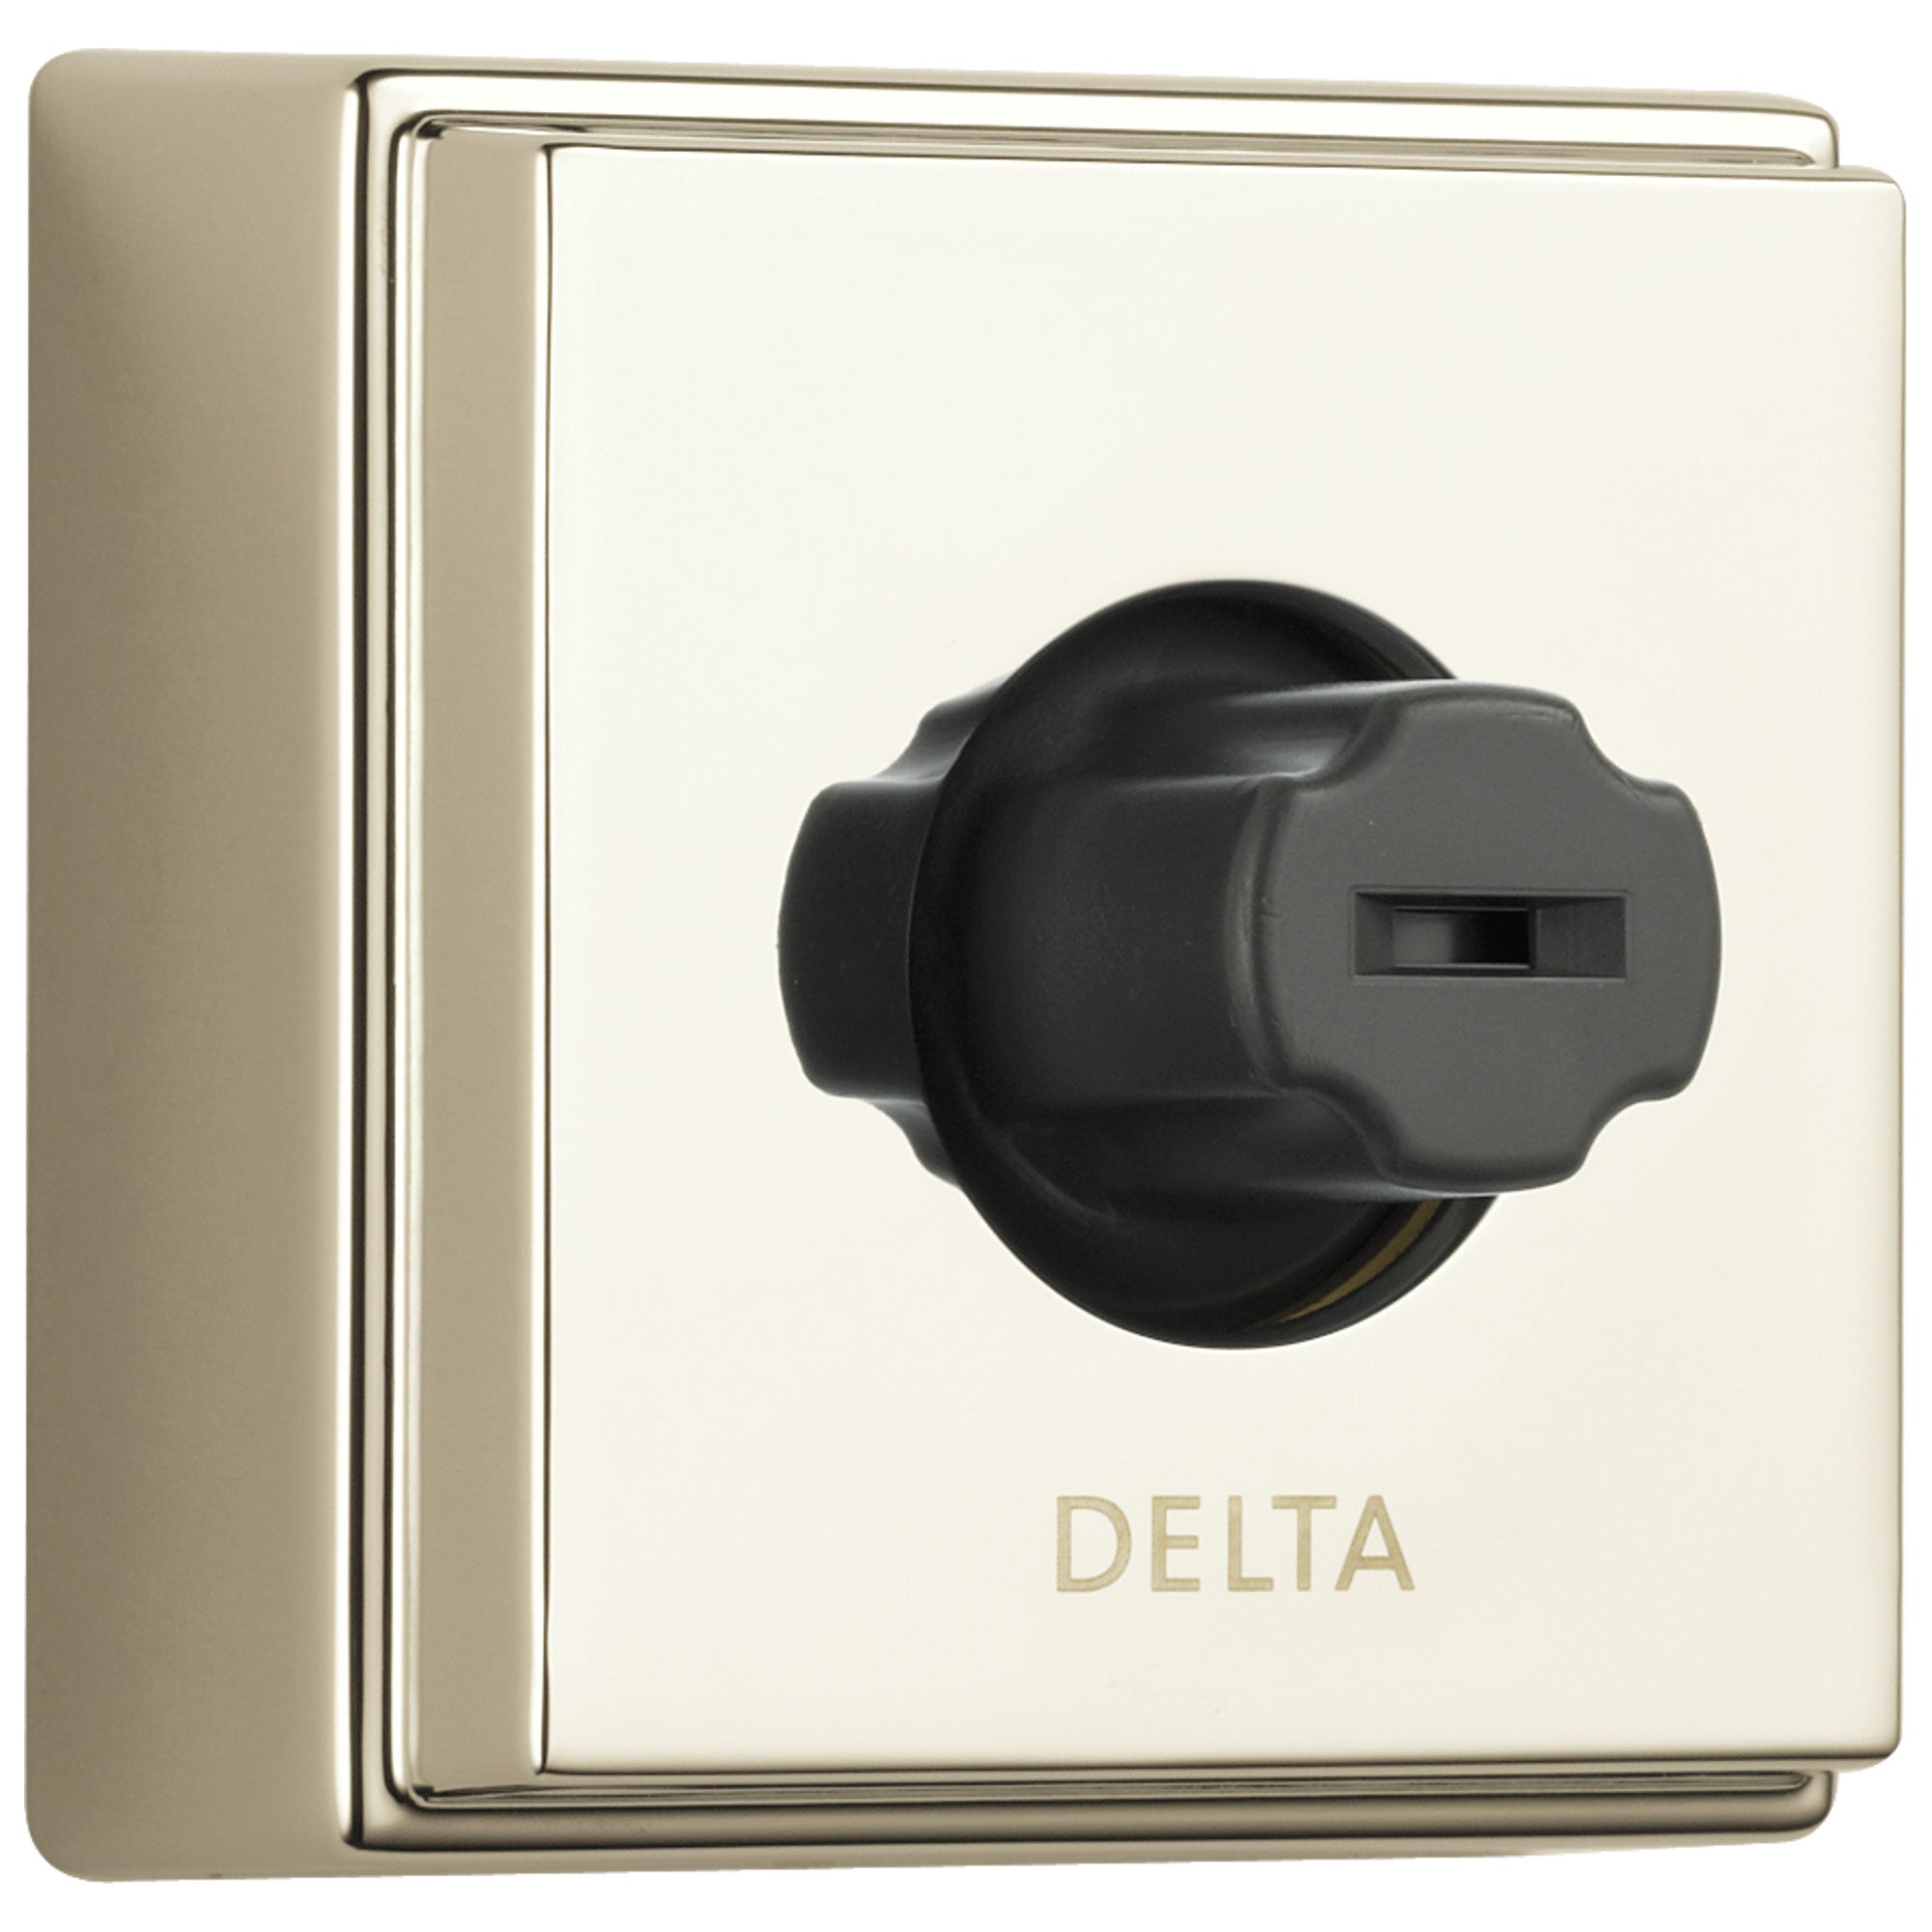 Delta Polished Nickel Finish Wall Mounted Body Jet Spray with H2Okinetic Technology D50101PN